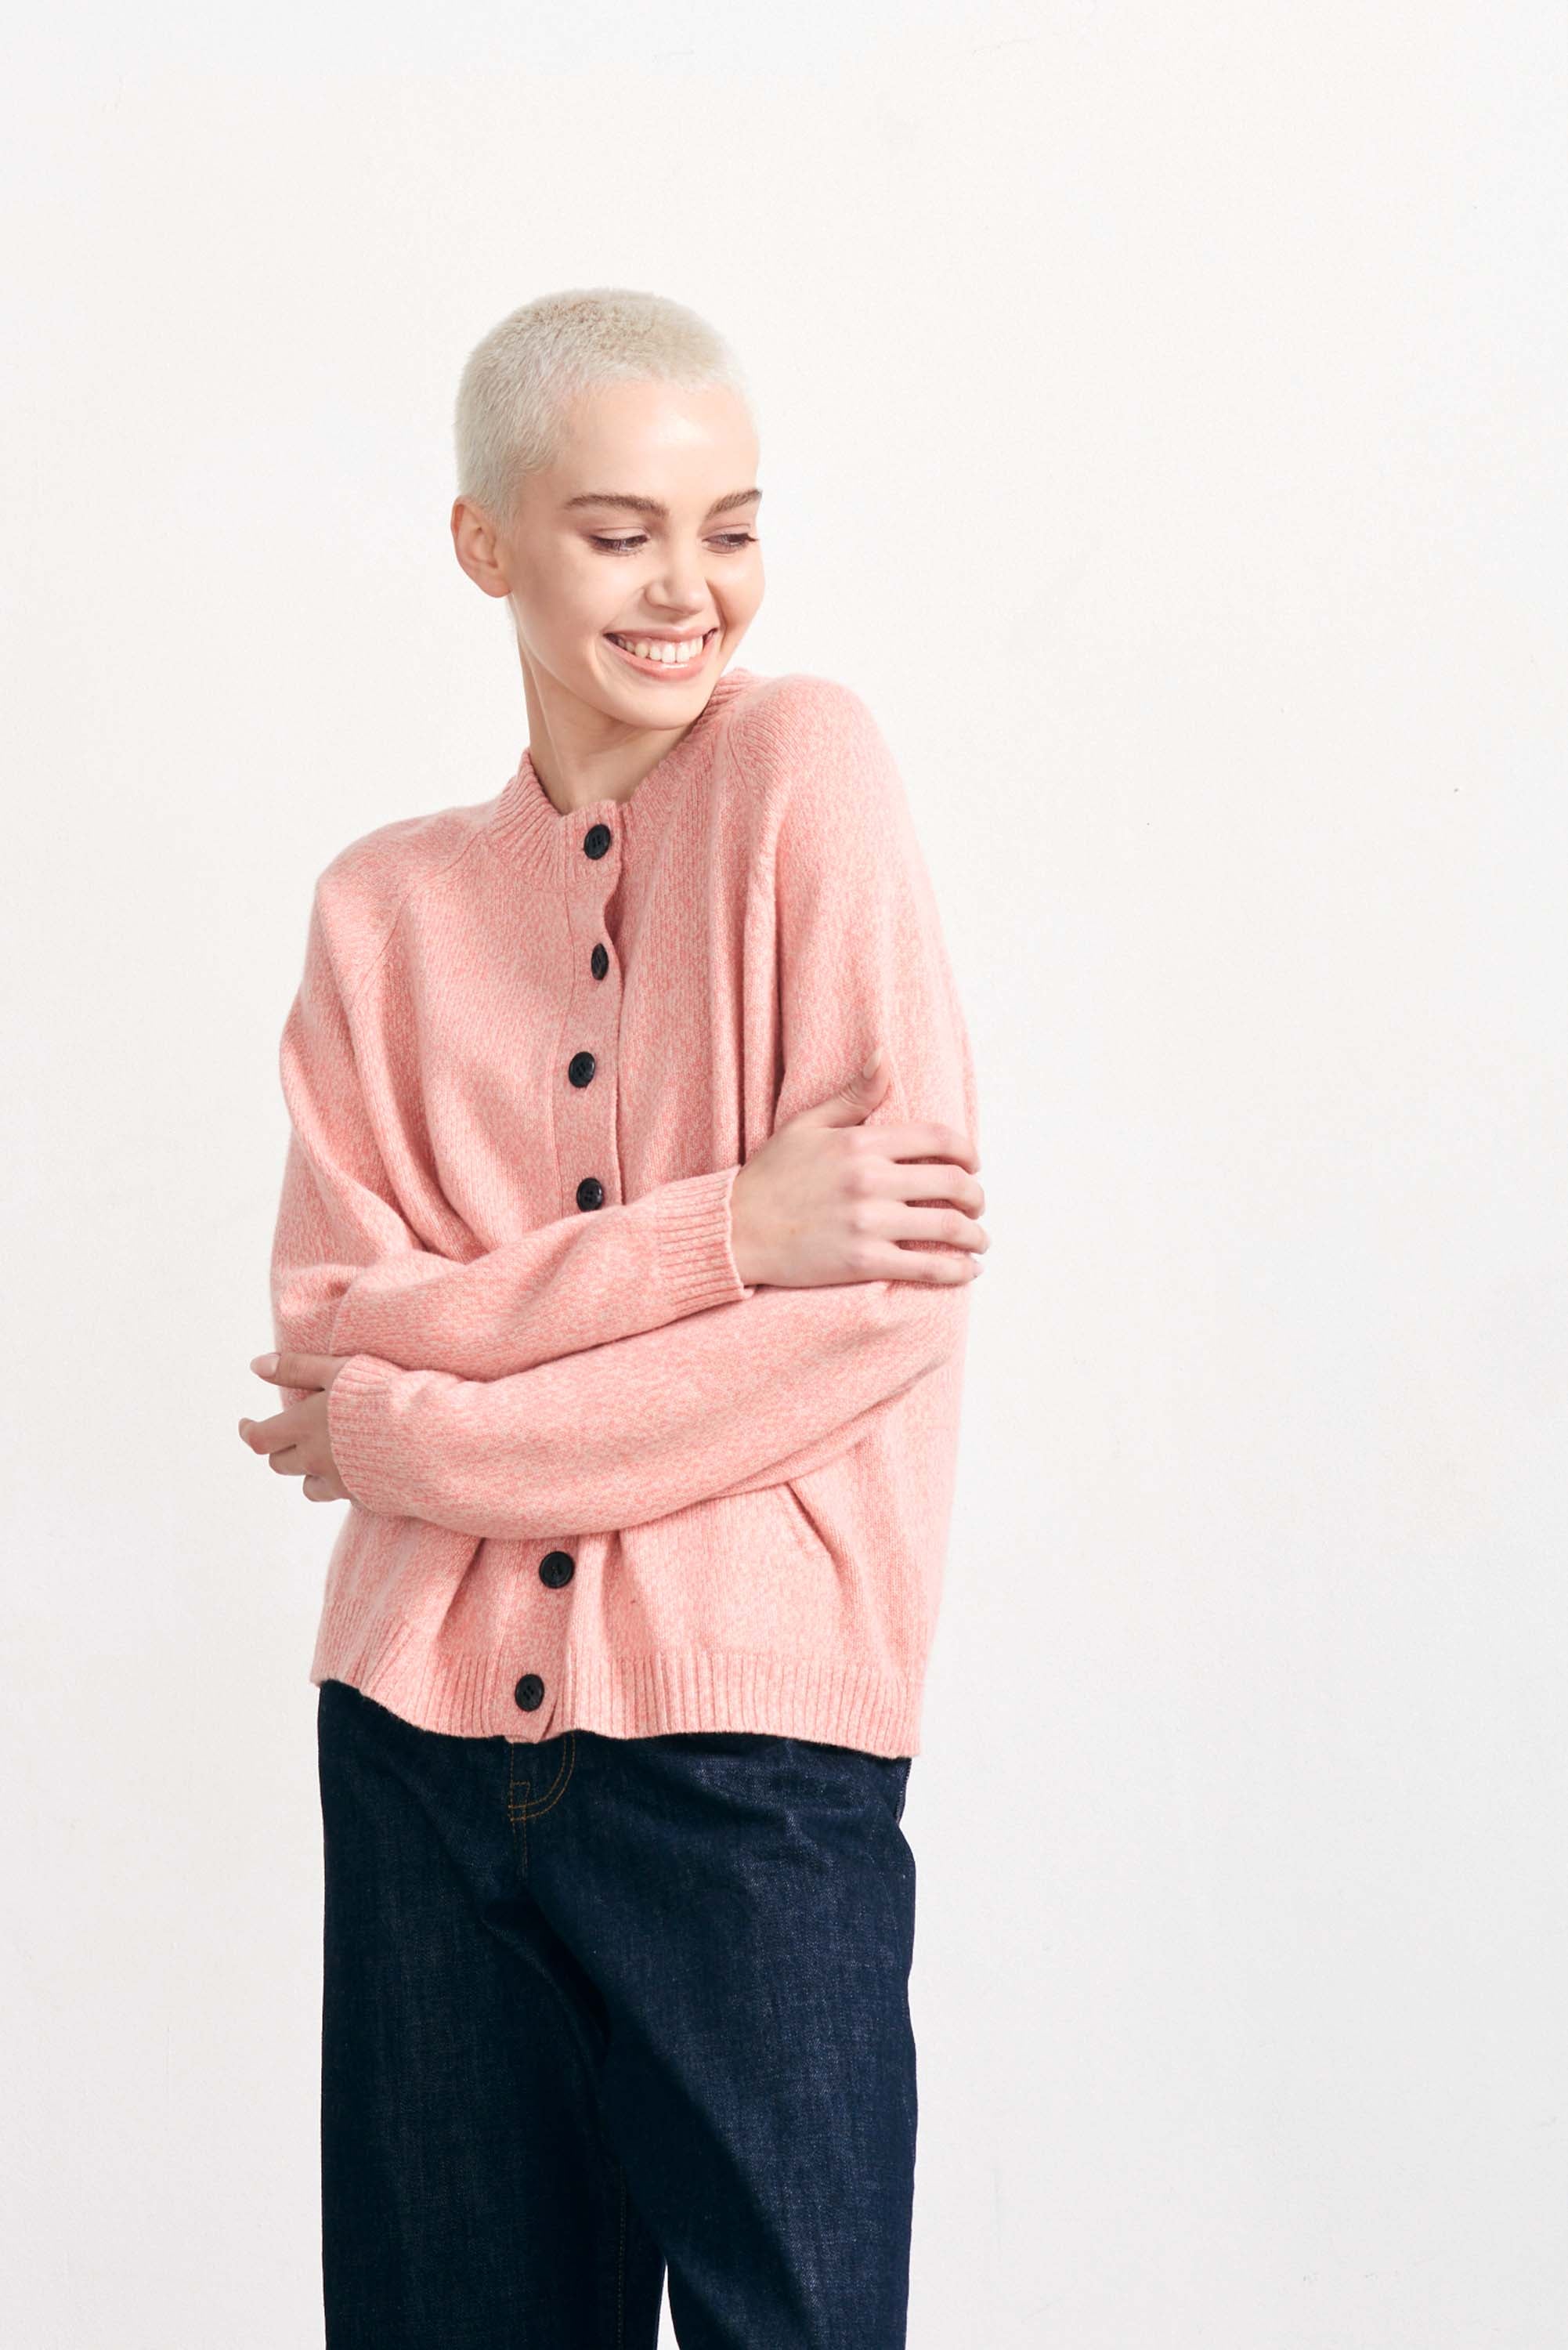 Blonde female model wearing Jumper 1234 cashmere and wool heavier weight round neck cardigan in coral marl